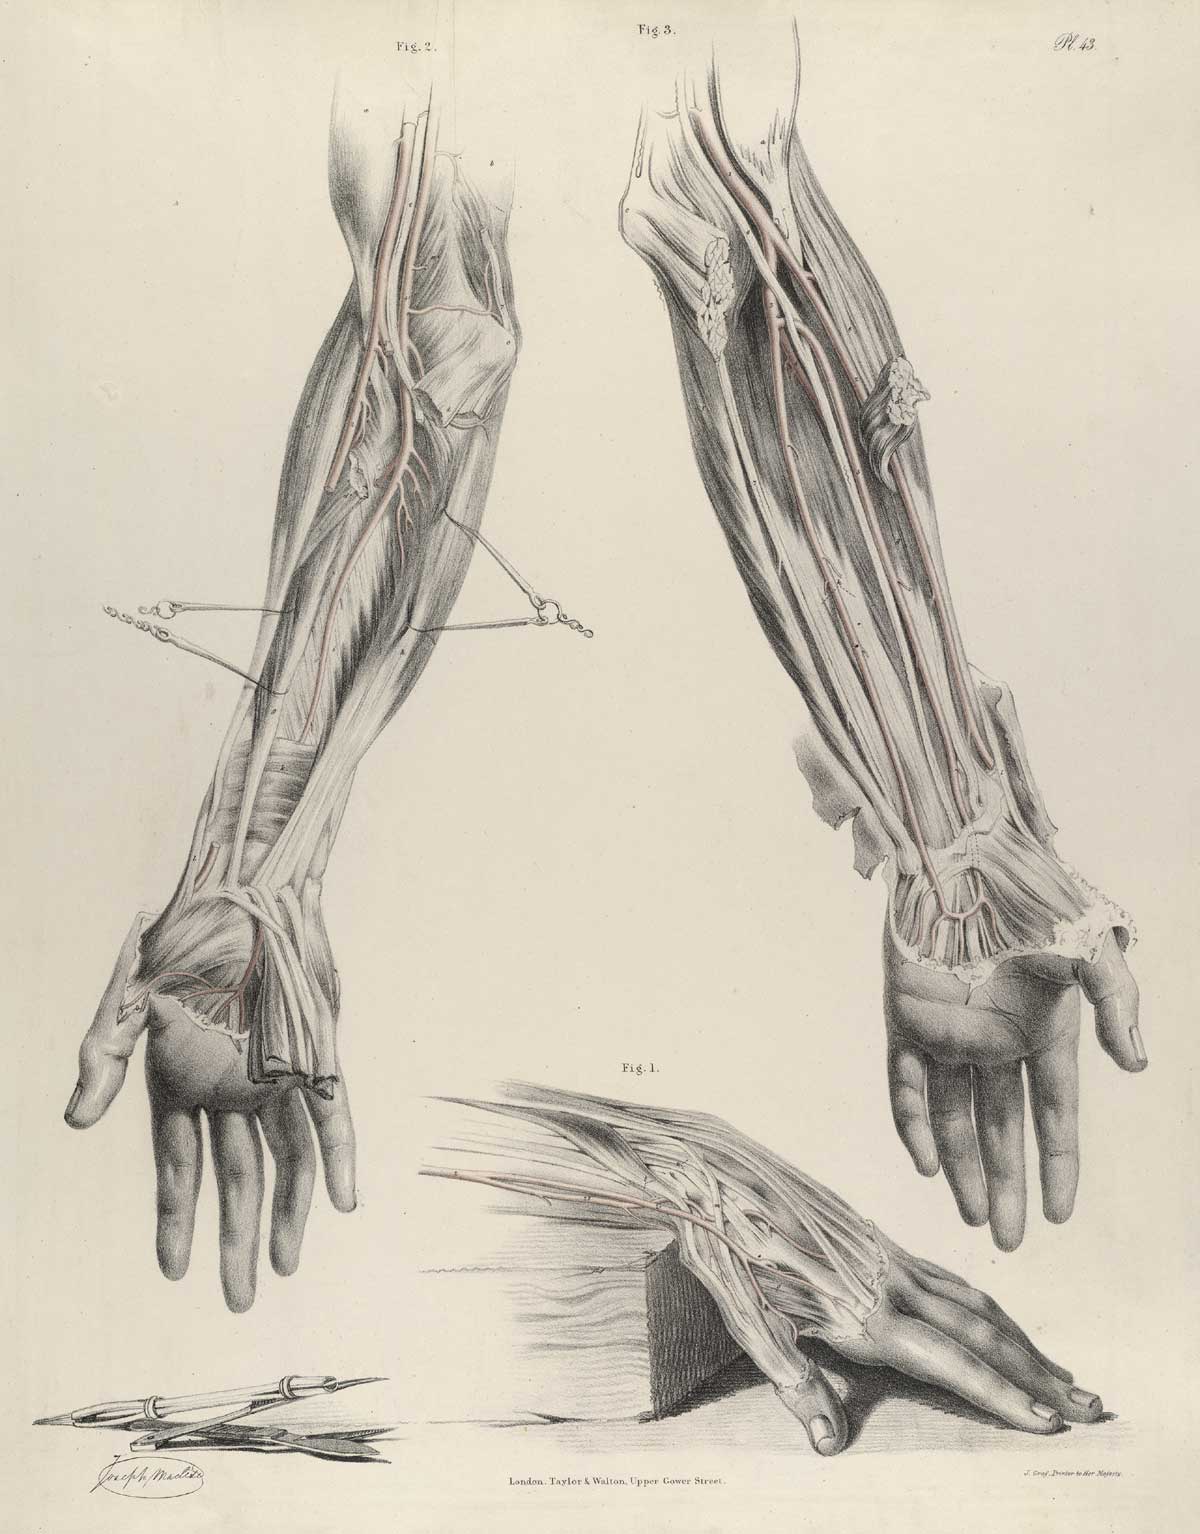 Plate 43 of Quain's The anatomy of the arteries of the human body, with its applications to pathology and operative surgery, featuring three images of the lower arm and hand of a corpse. The left image details the right arm with its arteries and muscles, the right image is of the left arm with its arteries and muscles, while the bottom image is the top view of the wrist and hand detailing the arteries and muscles.